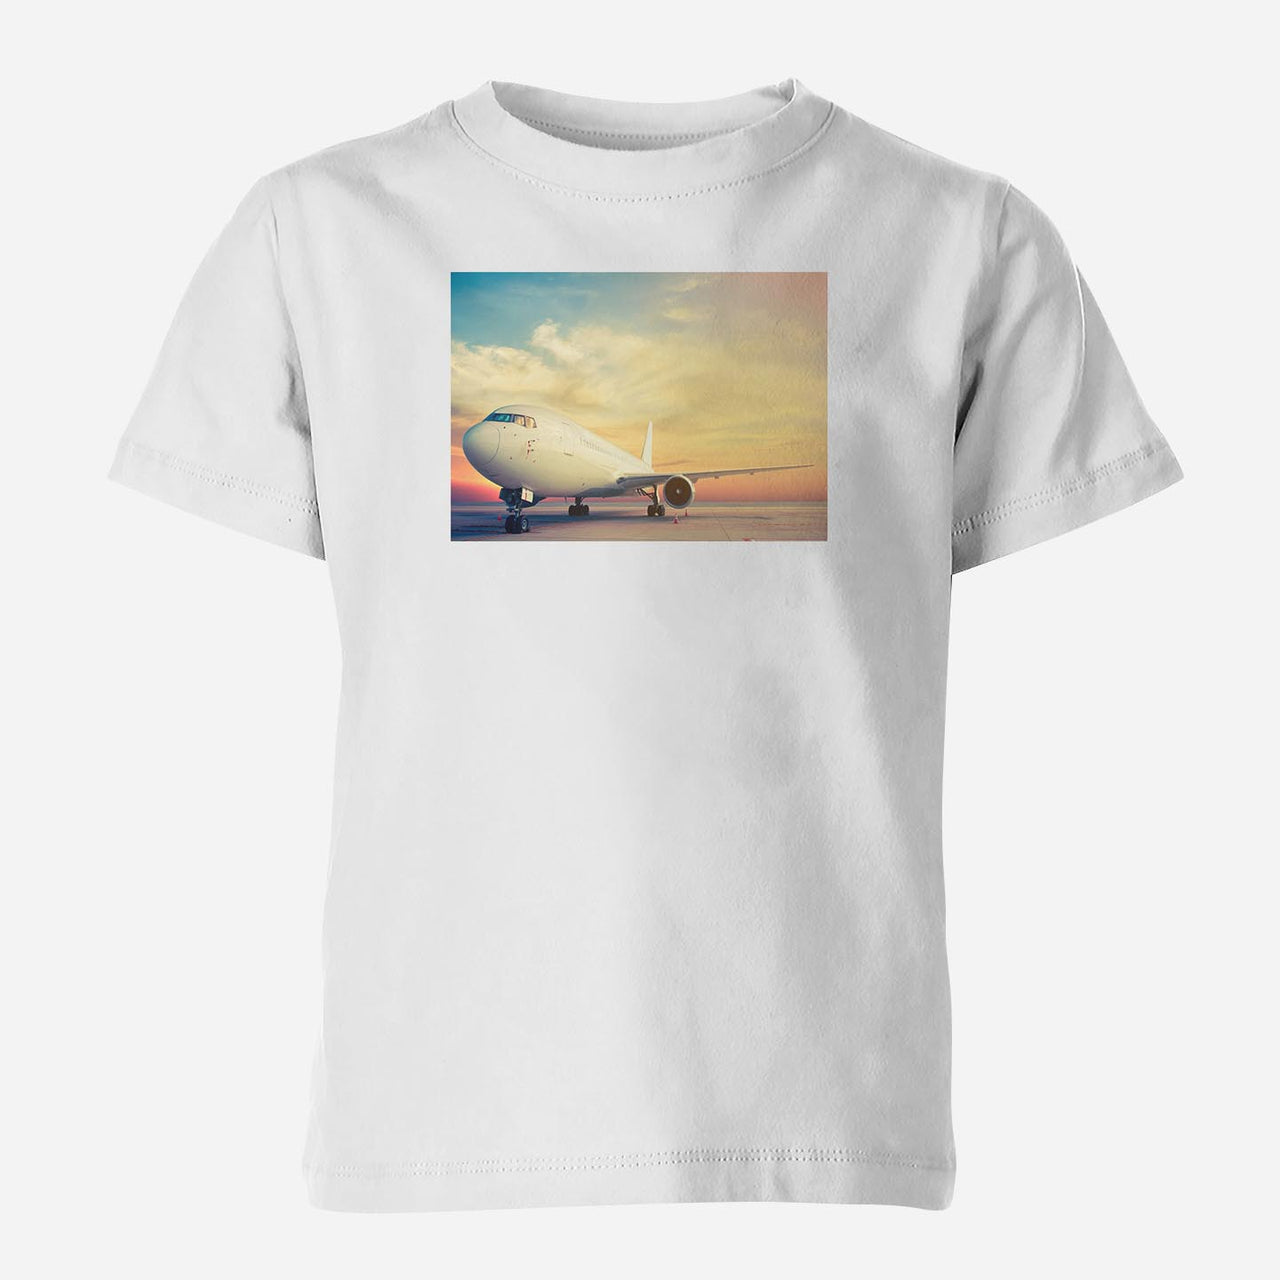 Parked Aircraft During Sunset Designed Children T-Shirts